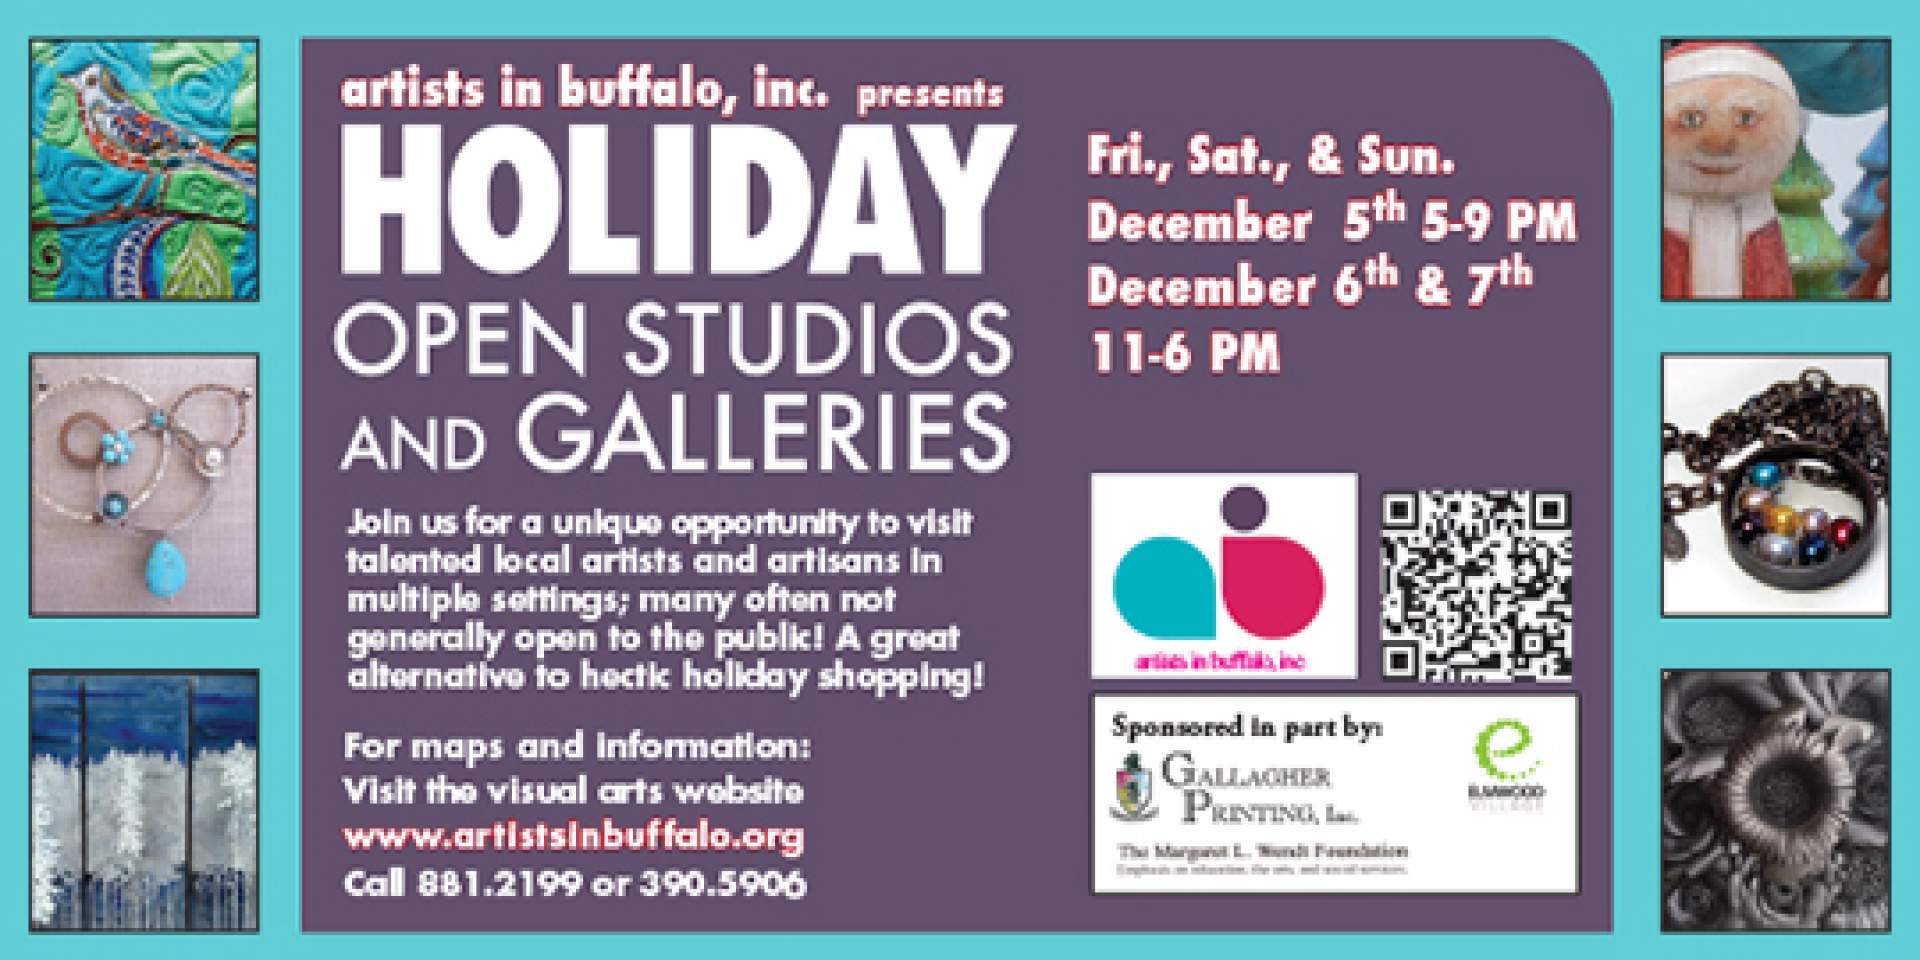 Holiday Open Studios at the Burchfield Penney